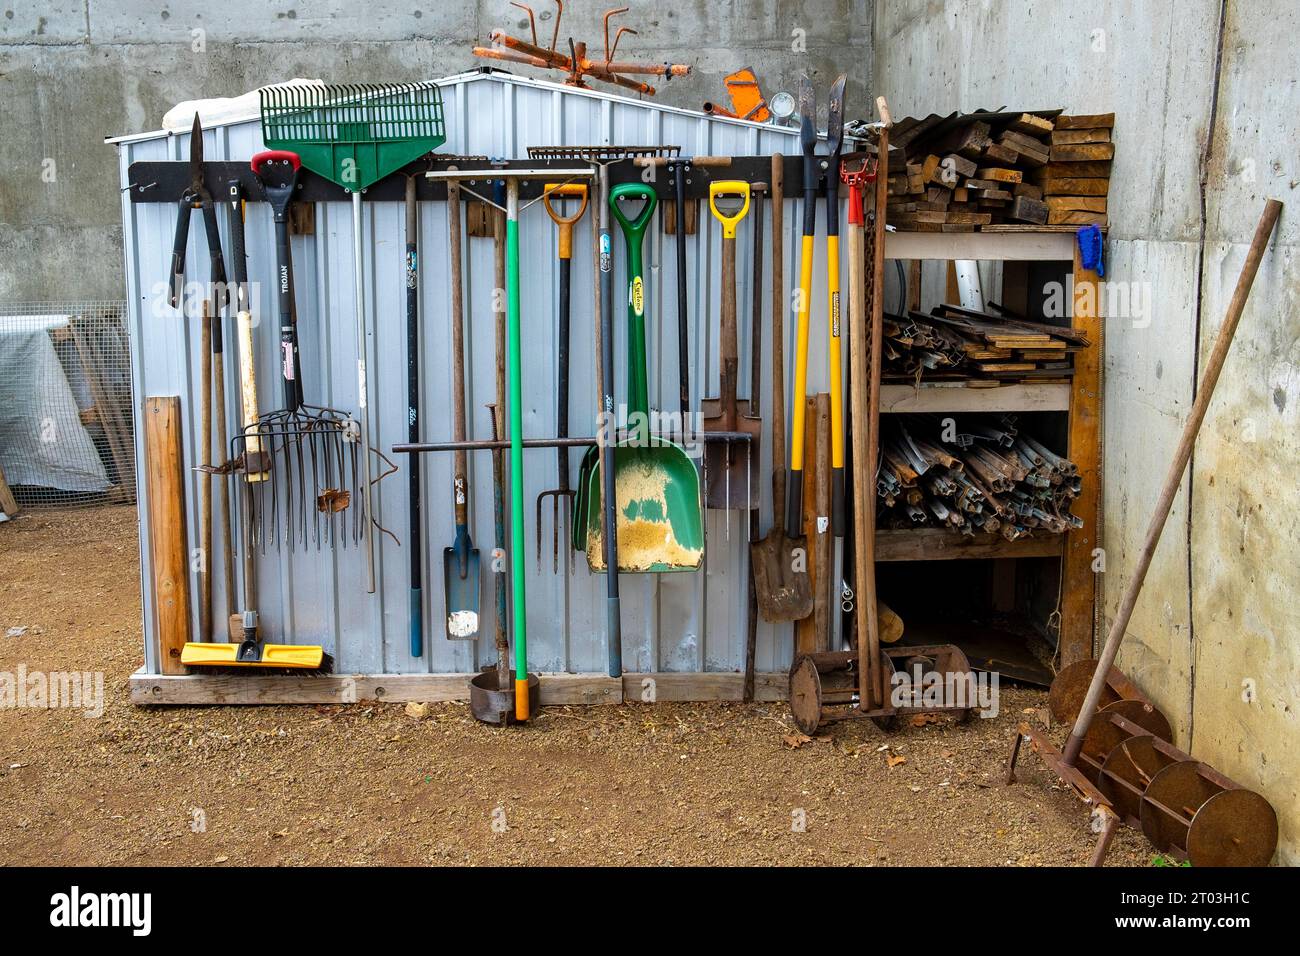 A well-ordered array of garden tools at the Agrarian Kitchen garden at Willow Court, New Norfolk, shovels, spades, forks and rakes at Norfolk in the Derwent Valley, Tasmania. Stock Photo